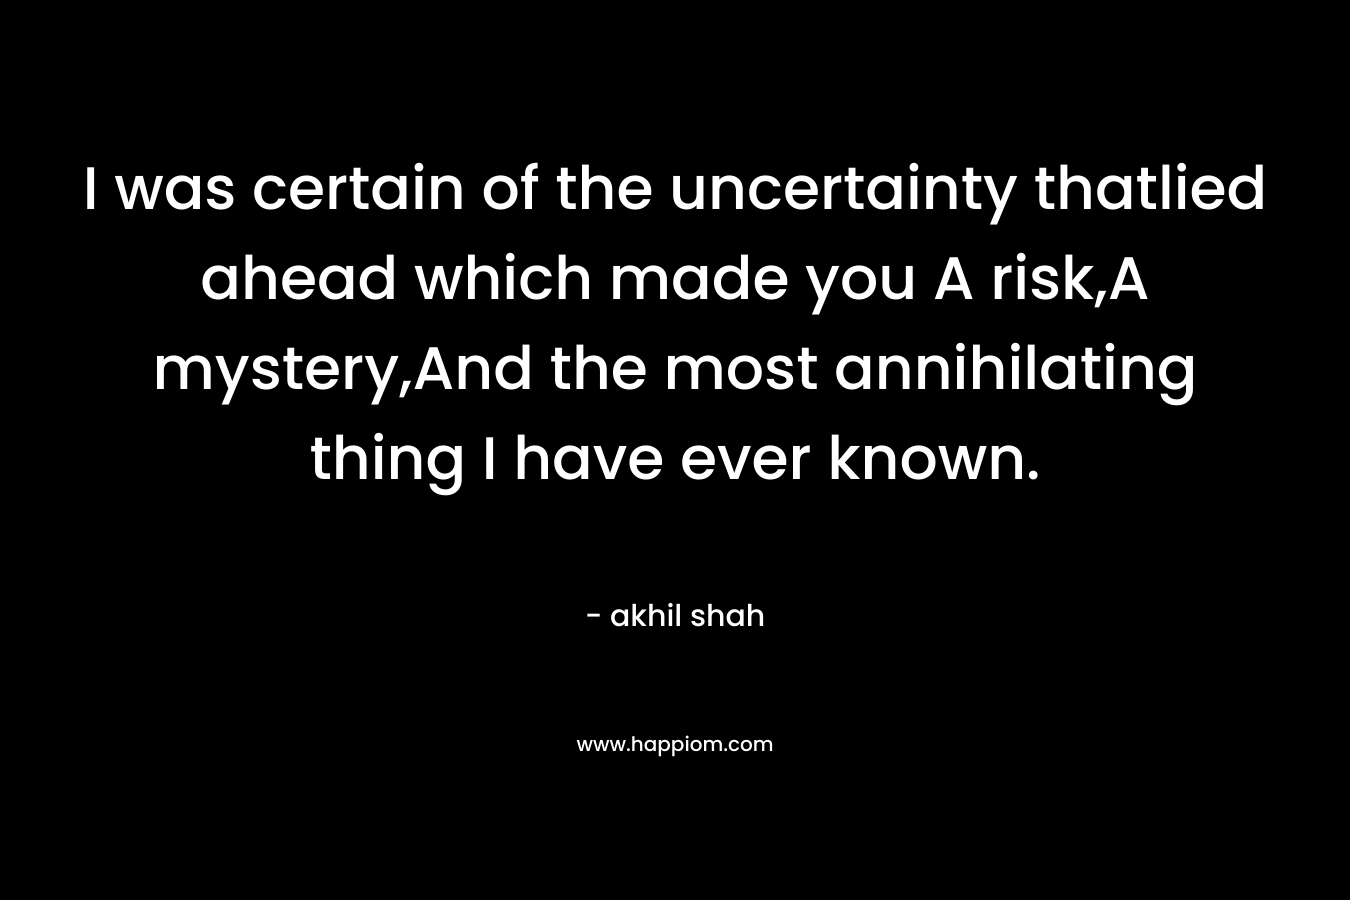 I was certain of the uncertainty thatlied ahead which made you A risk,A mystery,And the most annihilating thing I have ever known.